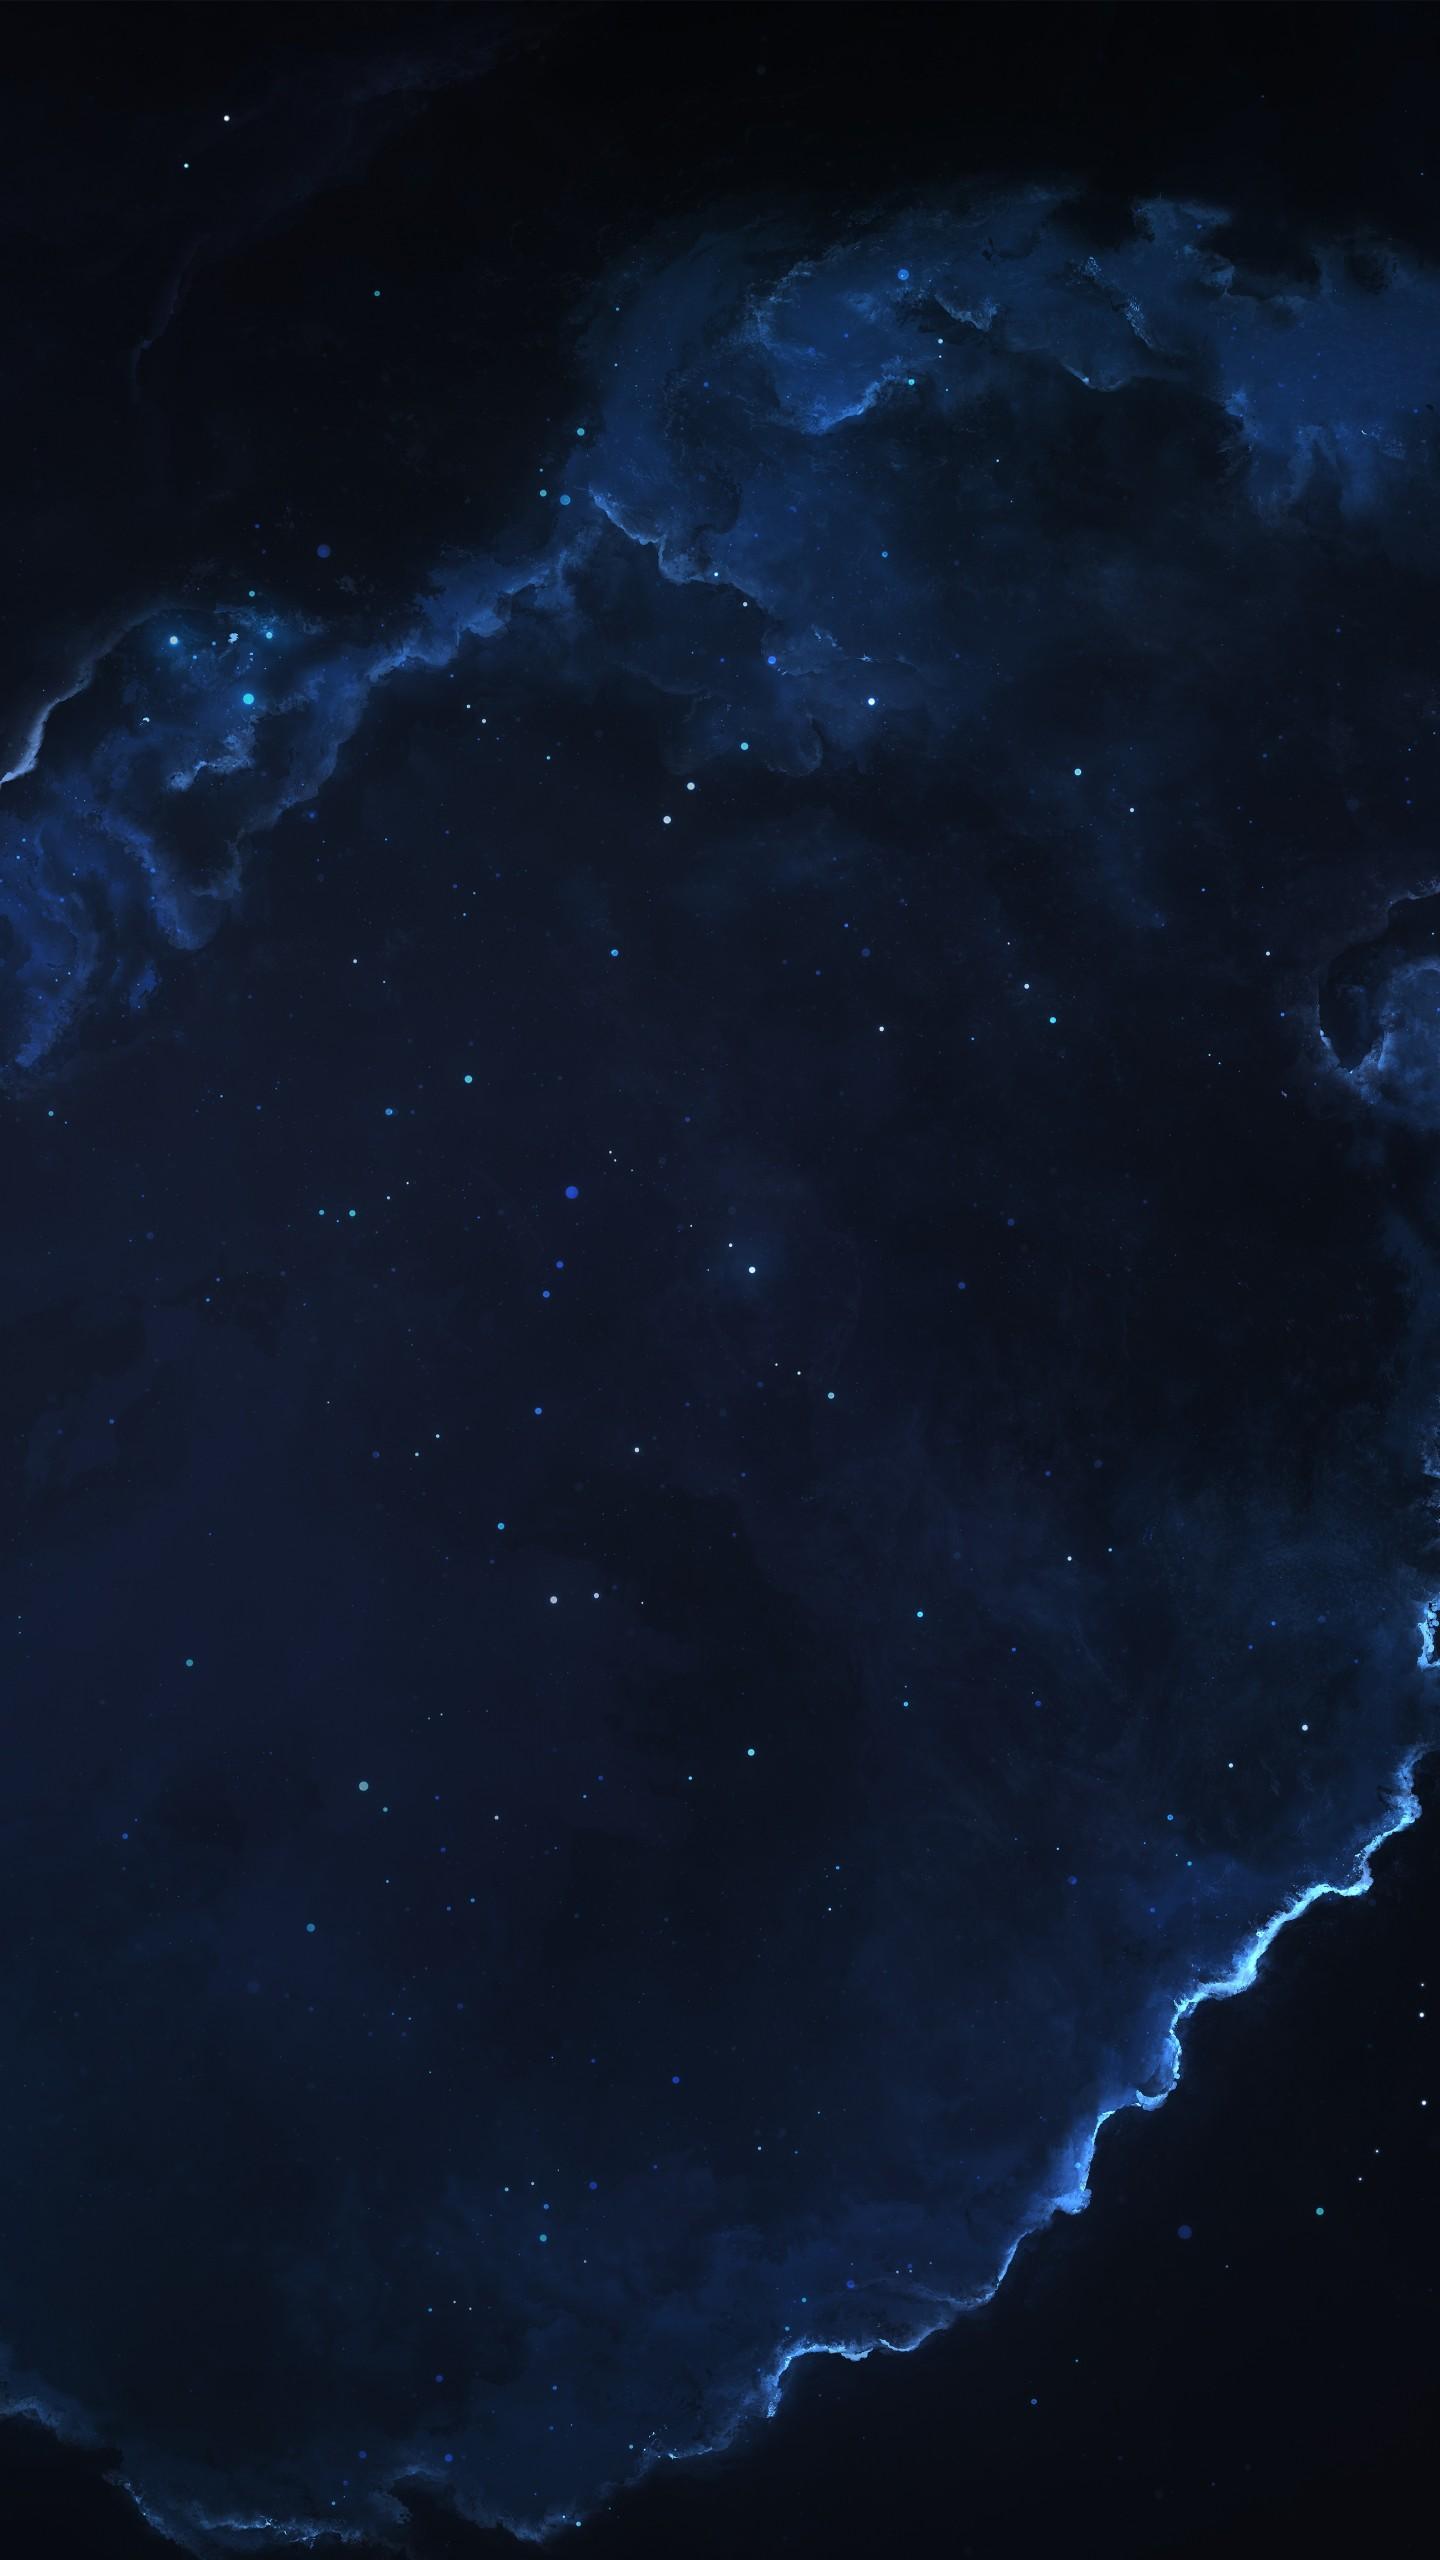 4k Mobile Space Wallpapers - Wallpaper Cave